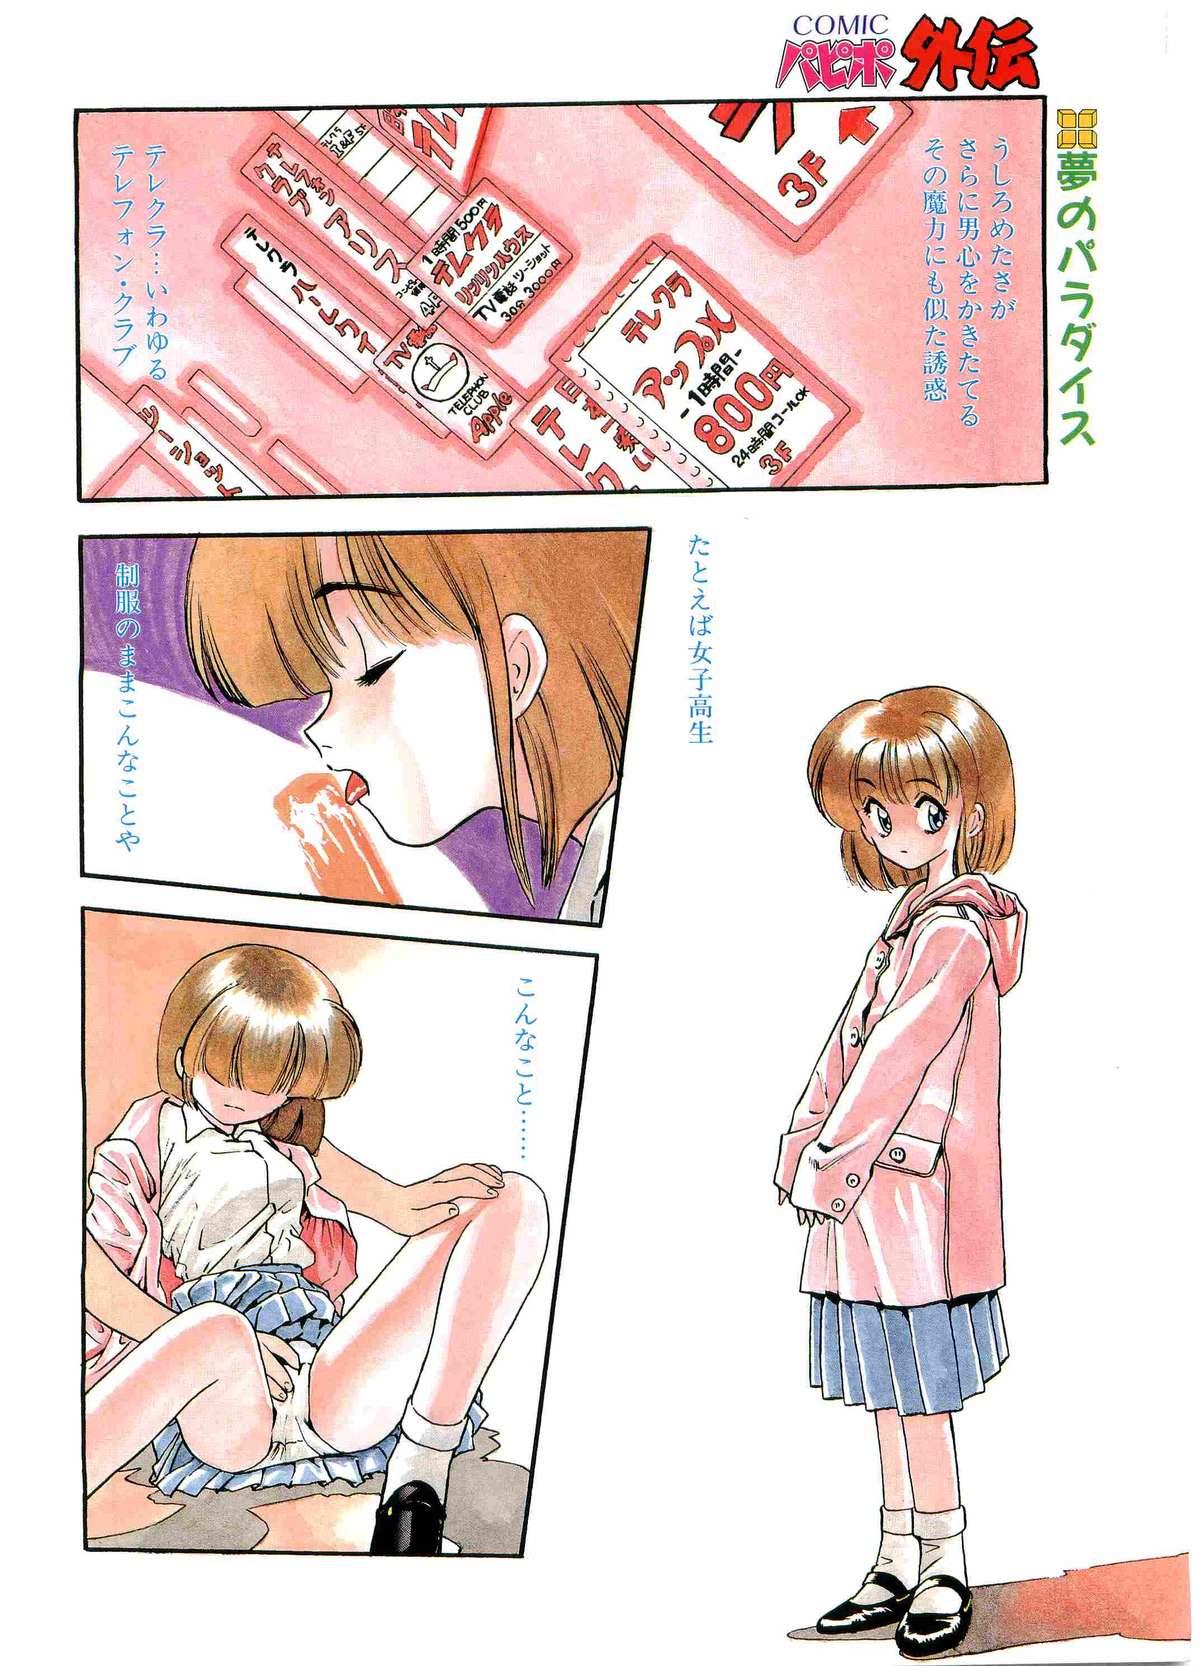 Gets COMIC Papipo Gaiden 1995-03 Brunettes - Page 4